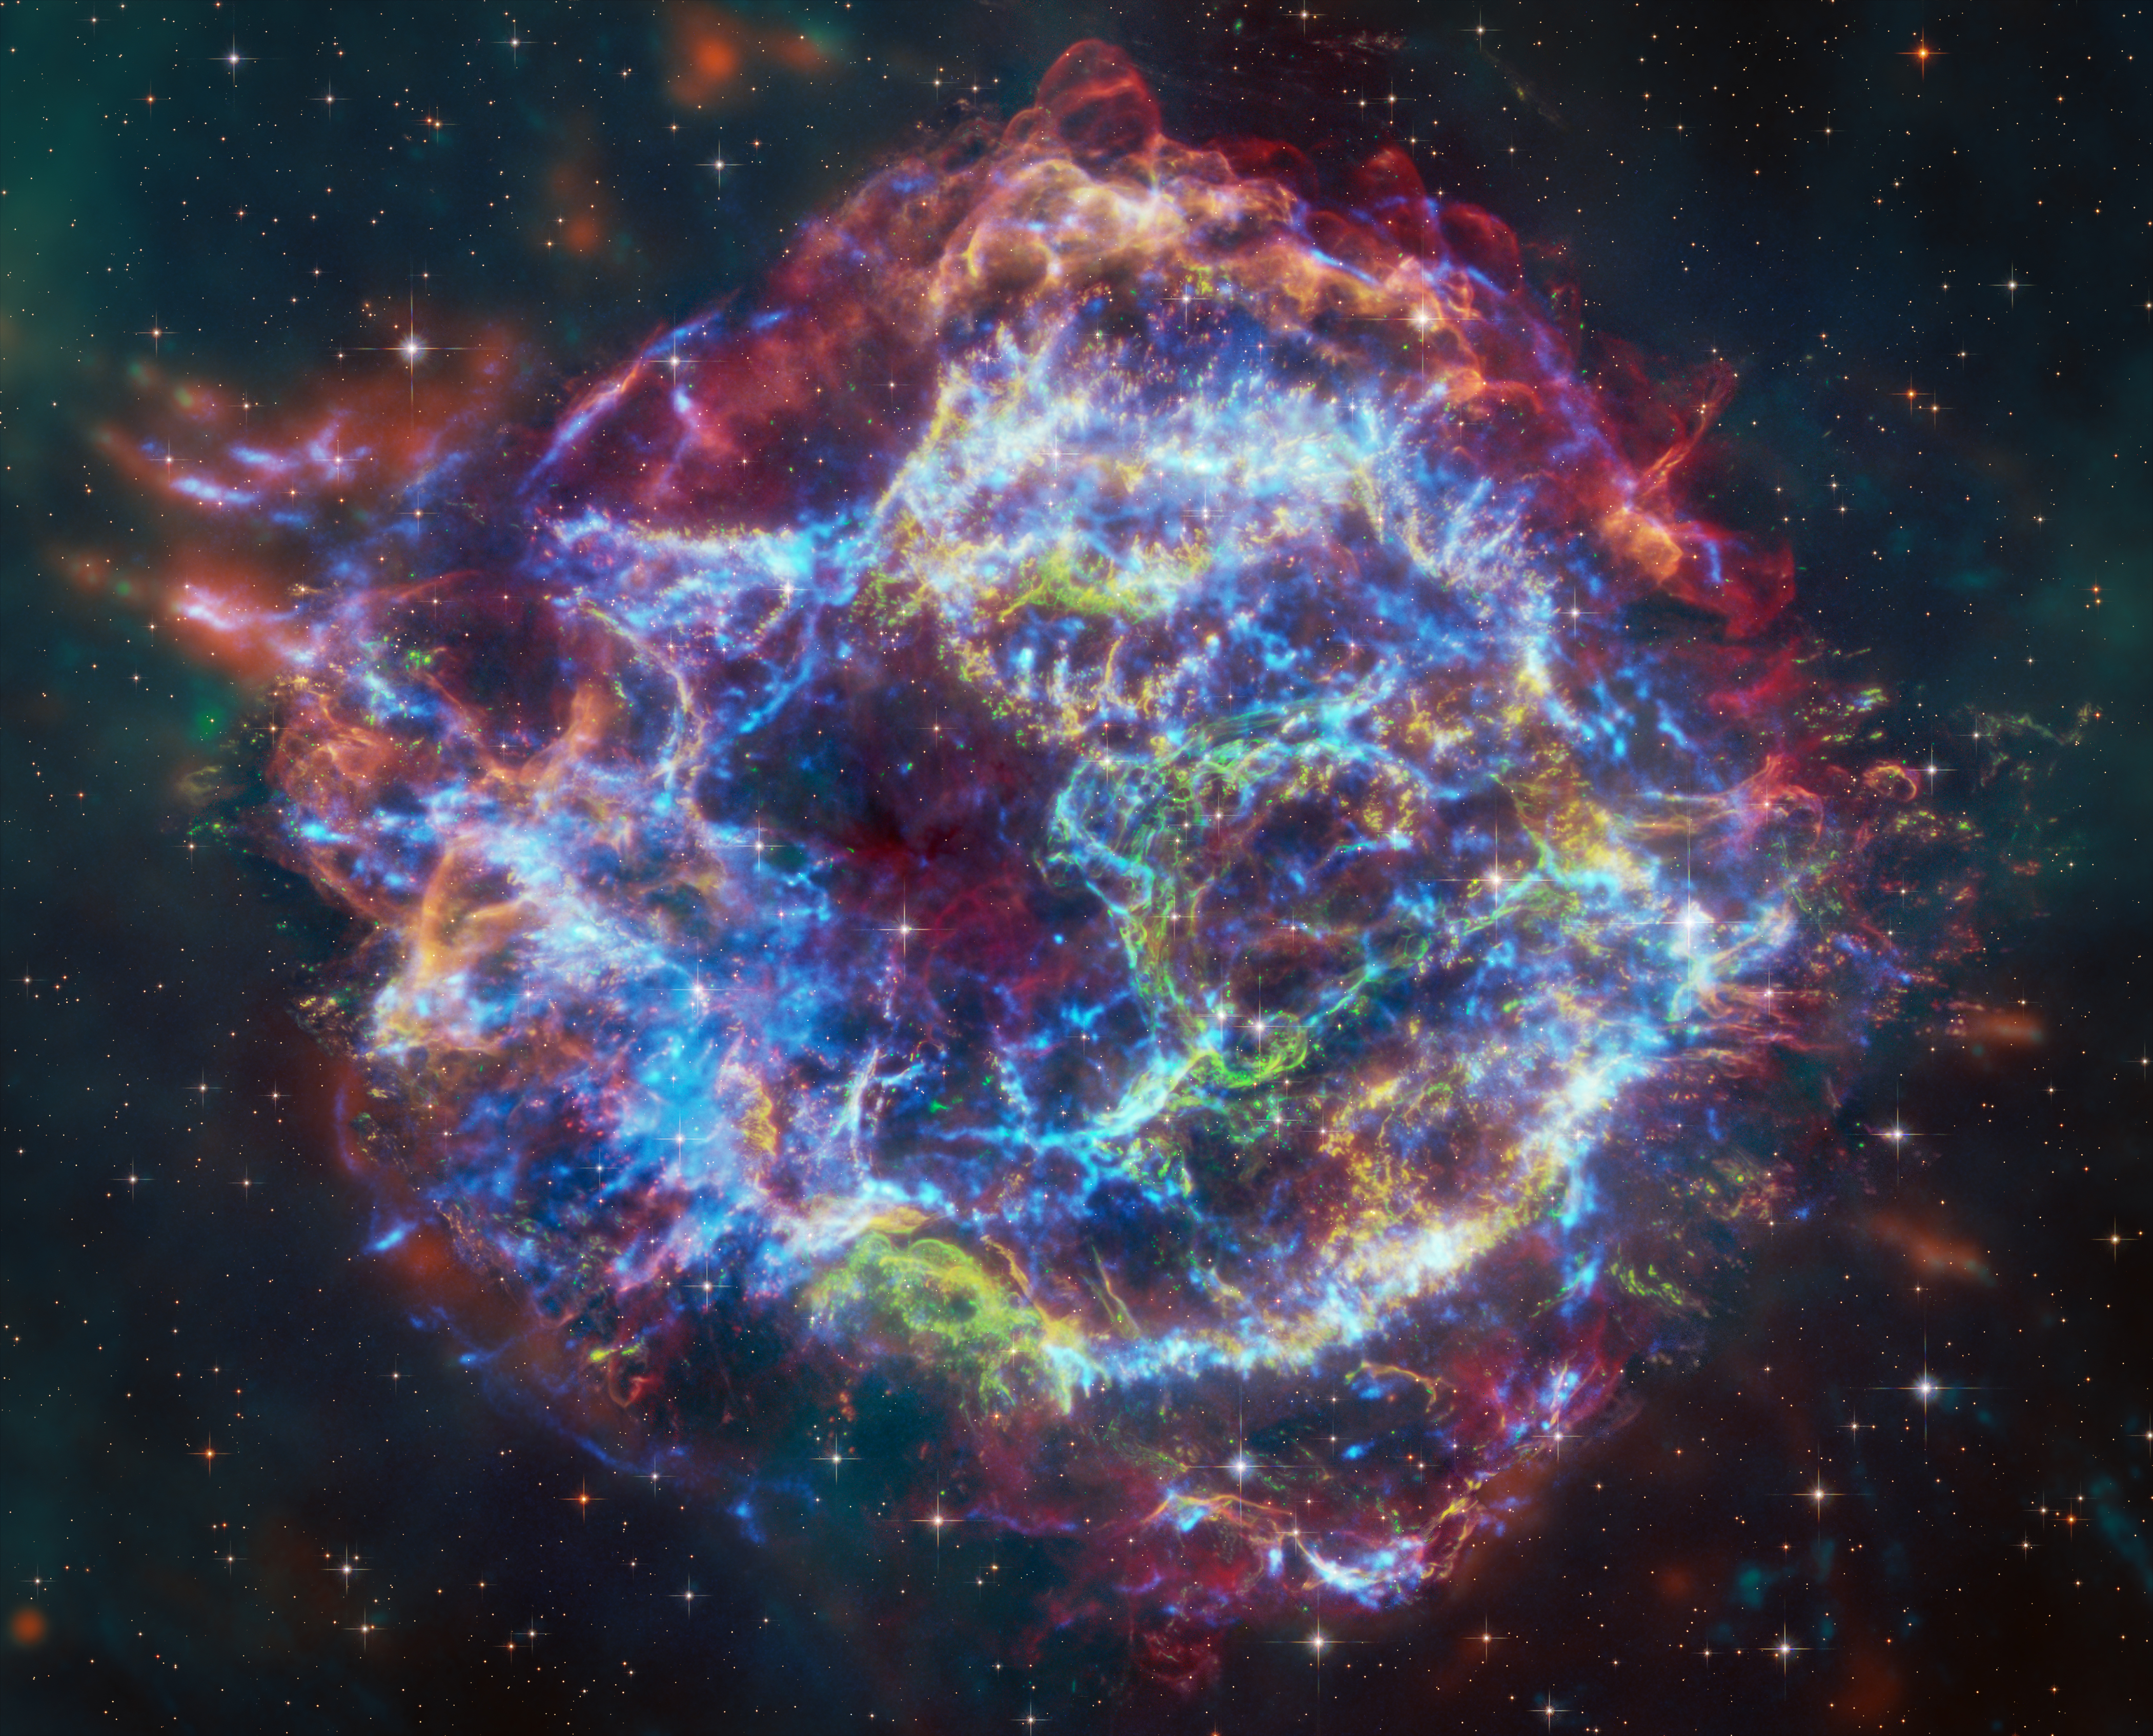 For the first time astronomers have combined data from NASA’s Chandra X-ray Observatory and James Webb Space Telescope to study the well-known supernova remnant Cassiopeia A (Cas A). This work has helped explain an unusual structure in the debris from the destroyed star called the “Green Monster”, first discovered in Webb data in April 2023. The research has also uncovered new details about the explosion that created Cas A about 340 years ago, from Earth’s perspective.A new composite image contains X-rays from Chandra (blue), infrared data from Webb (red, green, blue), and optical data from Hubble (red and white). The outer parts of the image also include infrared data from NASA’s Spitzer Space Telescope (red, green and blue). The outline of the Green Monster can be seen by mousing over the image in the original feature, located here: chandra.cfa.harvard.edu/photo/2024/casa/.The Chandra data reveals hot gas, mostly from supernova debris from the destroyed star, including elements like silicon and iron. In the outer parts of Cas A the expanding blast wave is striking surrounding gas that was ejected by the star before the explosion. The X-rays are produced by energetic electrons spiraling around magnetic field lines in the blast wave. These electrons light up as thin arcs in the outer regions of Cas A, and in parts of the interior. Webb highlights infrared emission from dust that is warmed up because it is embedded in the hot gas seen by Chandra, and from much cooler supernova debris. The Hubble data shows stars in the field.Detailed analysis by the researchers found that filaments in the outer part of Cas A, from the blast wave, closely matched the X-ray properties of the Green Monster, including less iron and silicon than in the supernova debris. This interpretation is apparent from the color Chandra image, which shows that the colors inside the Green Monster’s outline best match with the colors of the blast wave rather than the debris with iron and silicon. The authors conclude that the Green Monster was created by a blast wave from the exploded star slamming into material surrounding it, supporting earlier suggestions from the Webb data alone.The debris from the explosion is seen by Chandra because it is heated to tens of millions of degrees by shock waves, akin to sonic booms from a supersonic plane. Webb can see some material that has not been affected by shock waves, what can be called “pristine” debris.Read more here: chandra.cfa.harvard.edu/photo/2024/casa/.